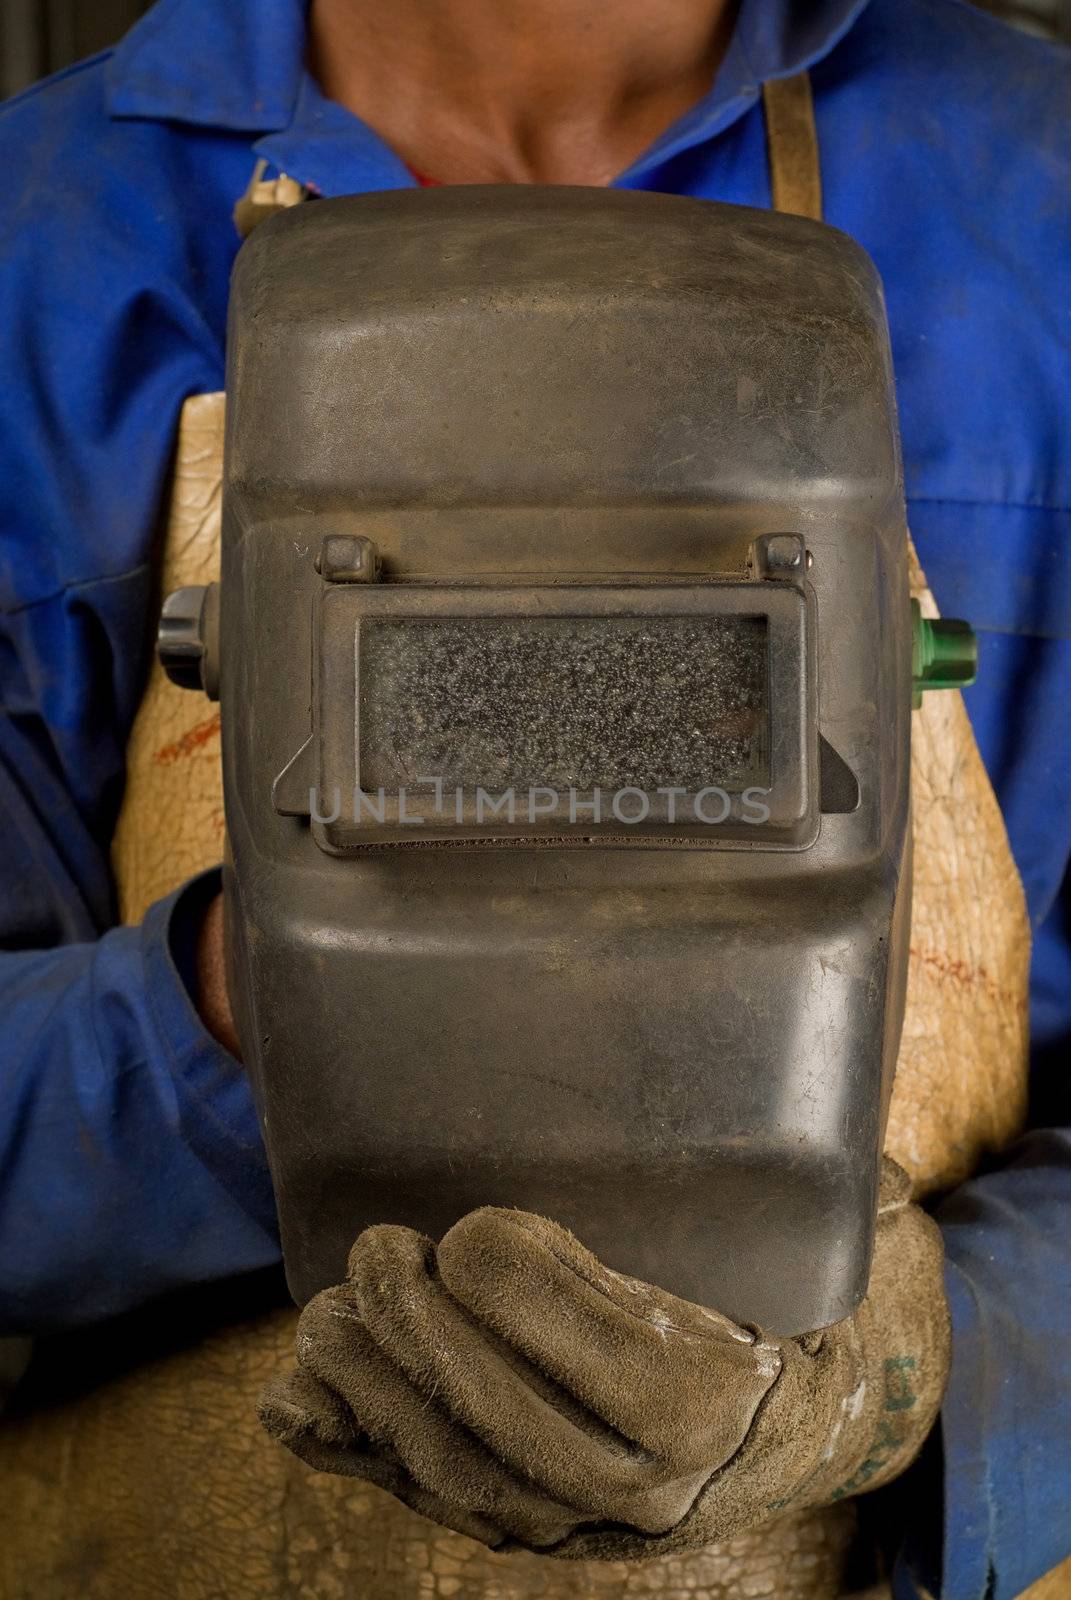 African welder with mask by alistaircotton